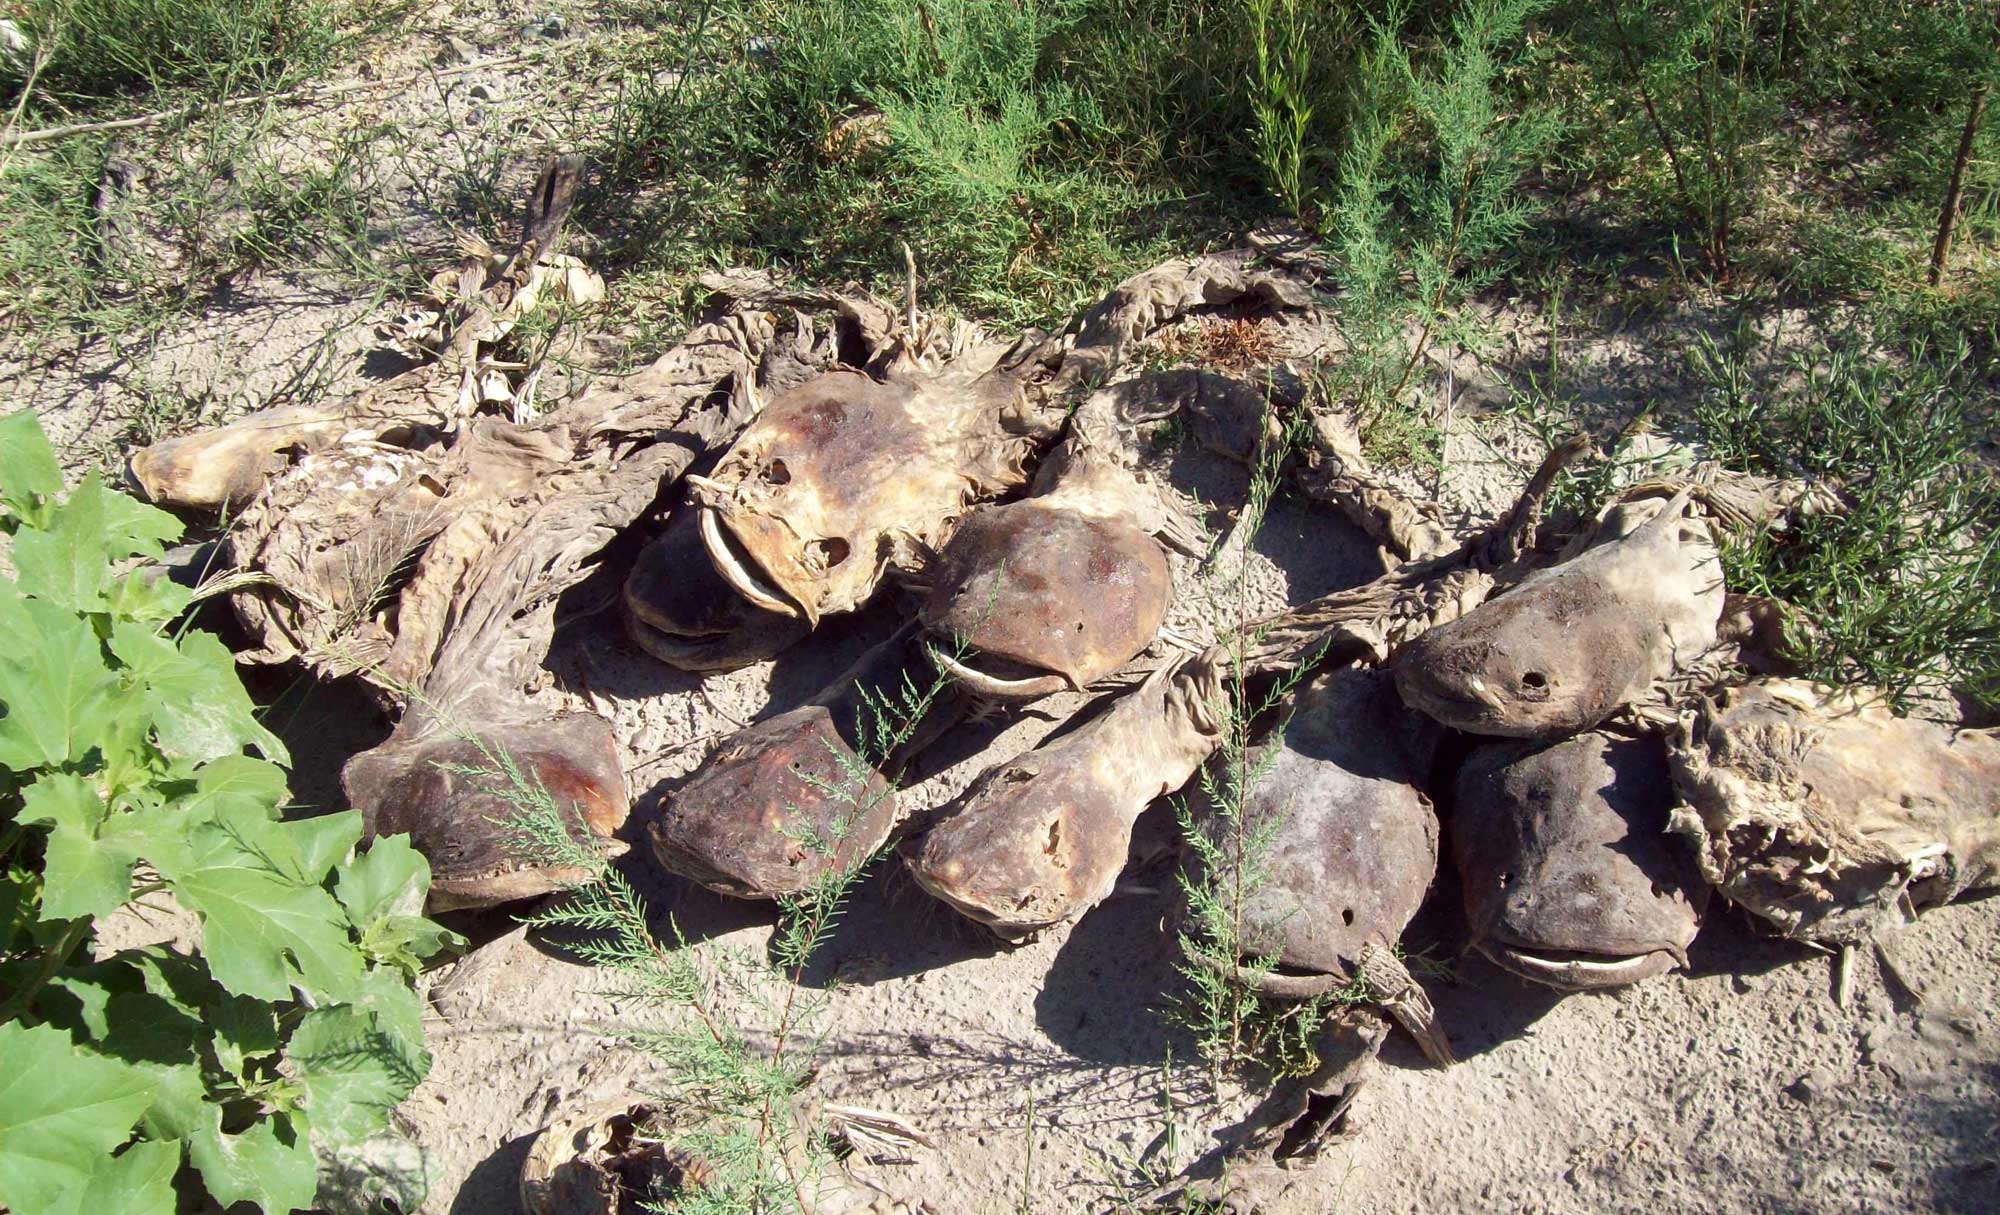 Photo of a pile of dead, desiccated catfish in sandy sediment. The catfish are in a dried-up part of O.C. Fisher Reservoir, San Angelo State Park, Texas, during a 2011 drought.